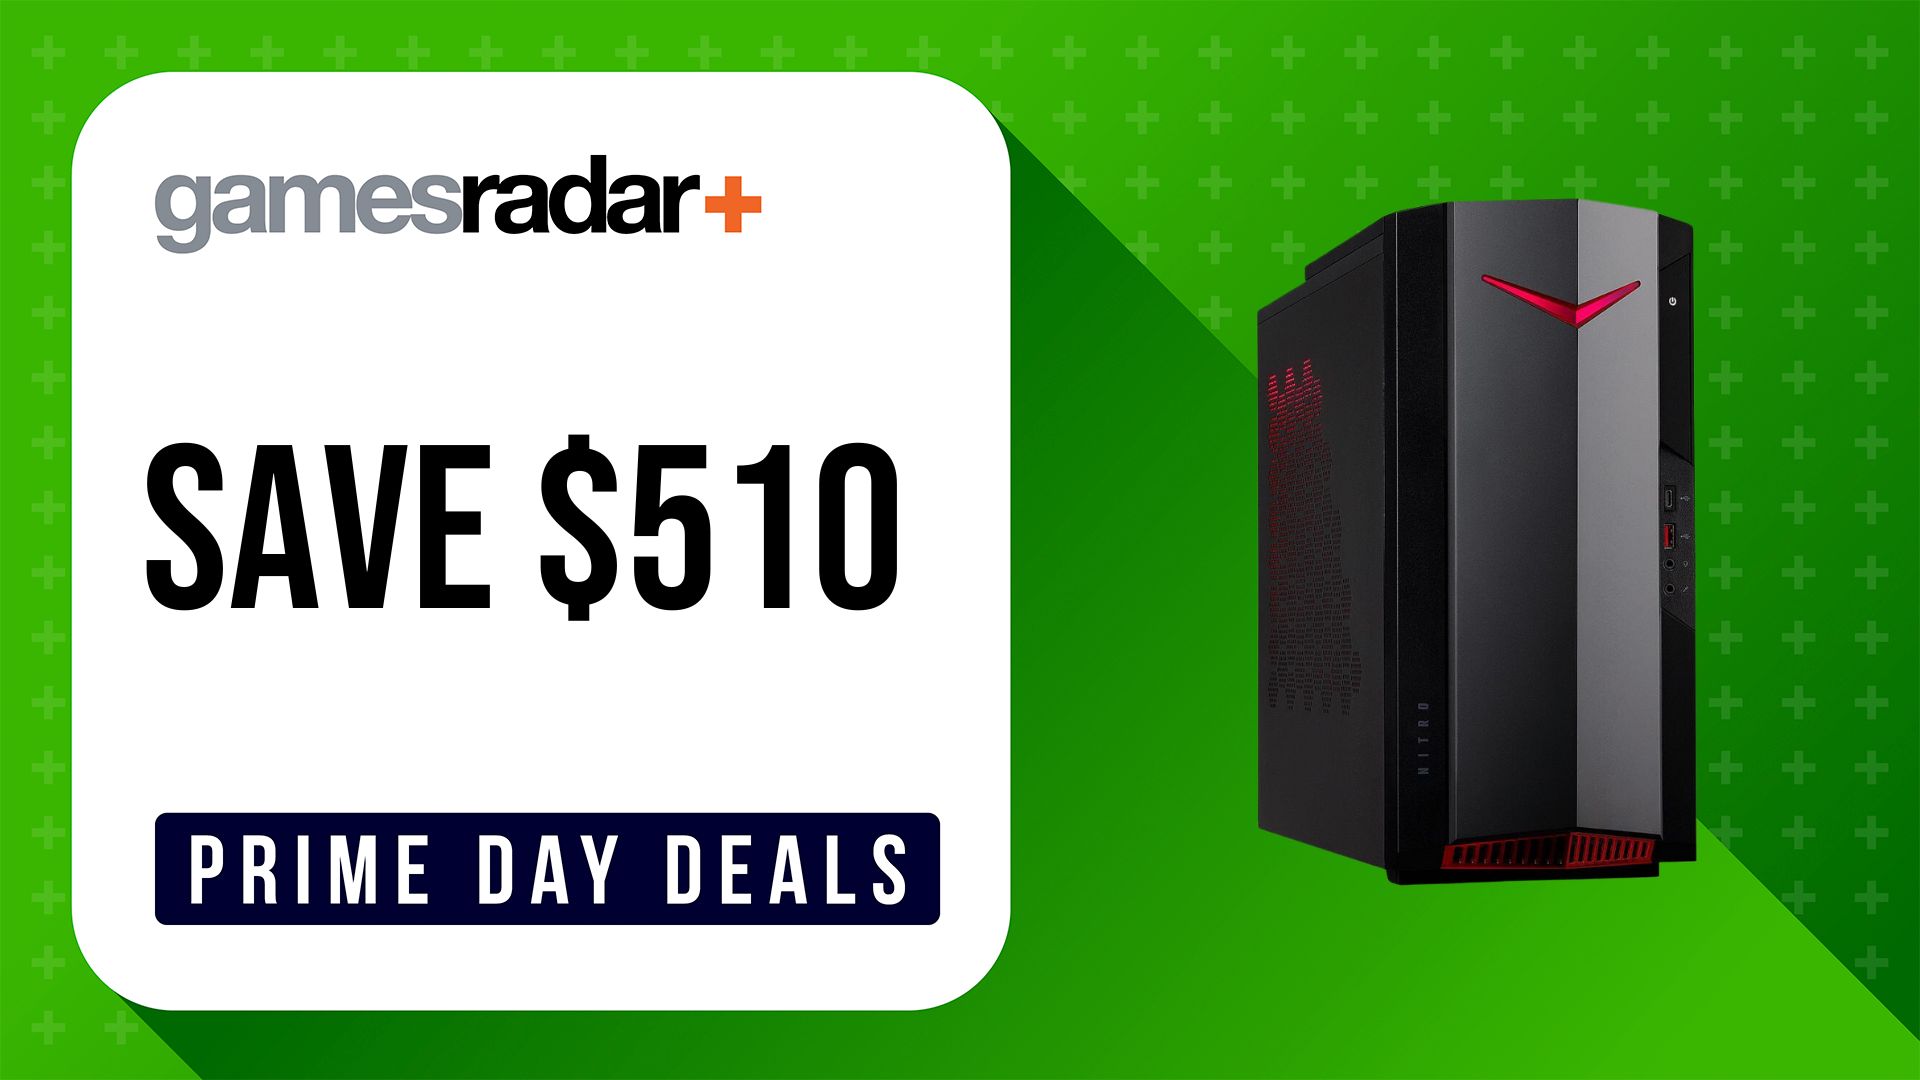 Acer nitro Prime Day gaming PC deal with $510 saving stamp and green background